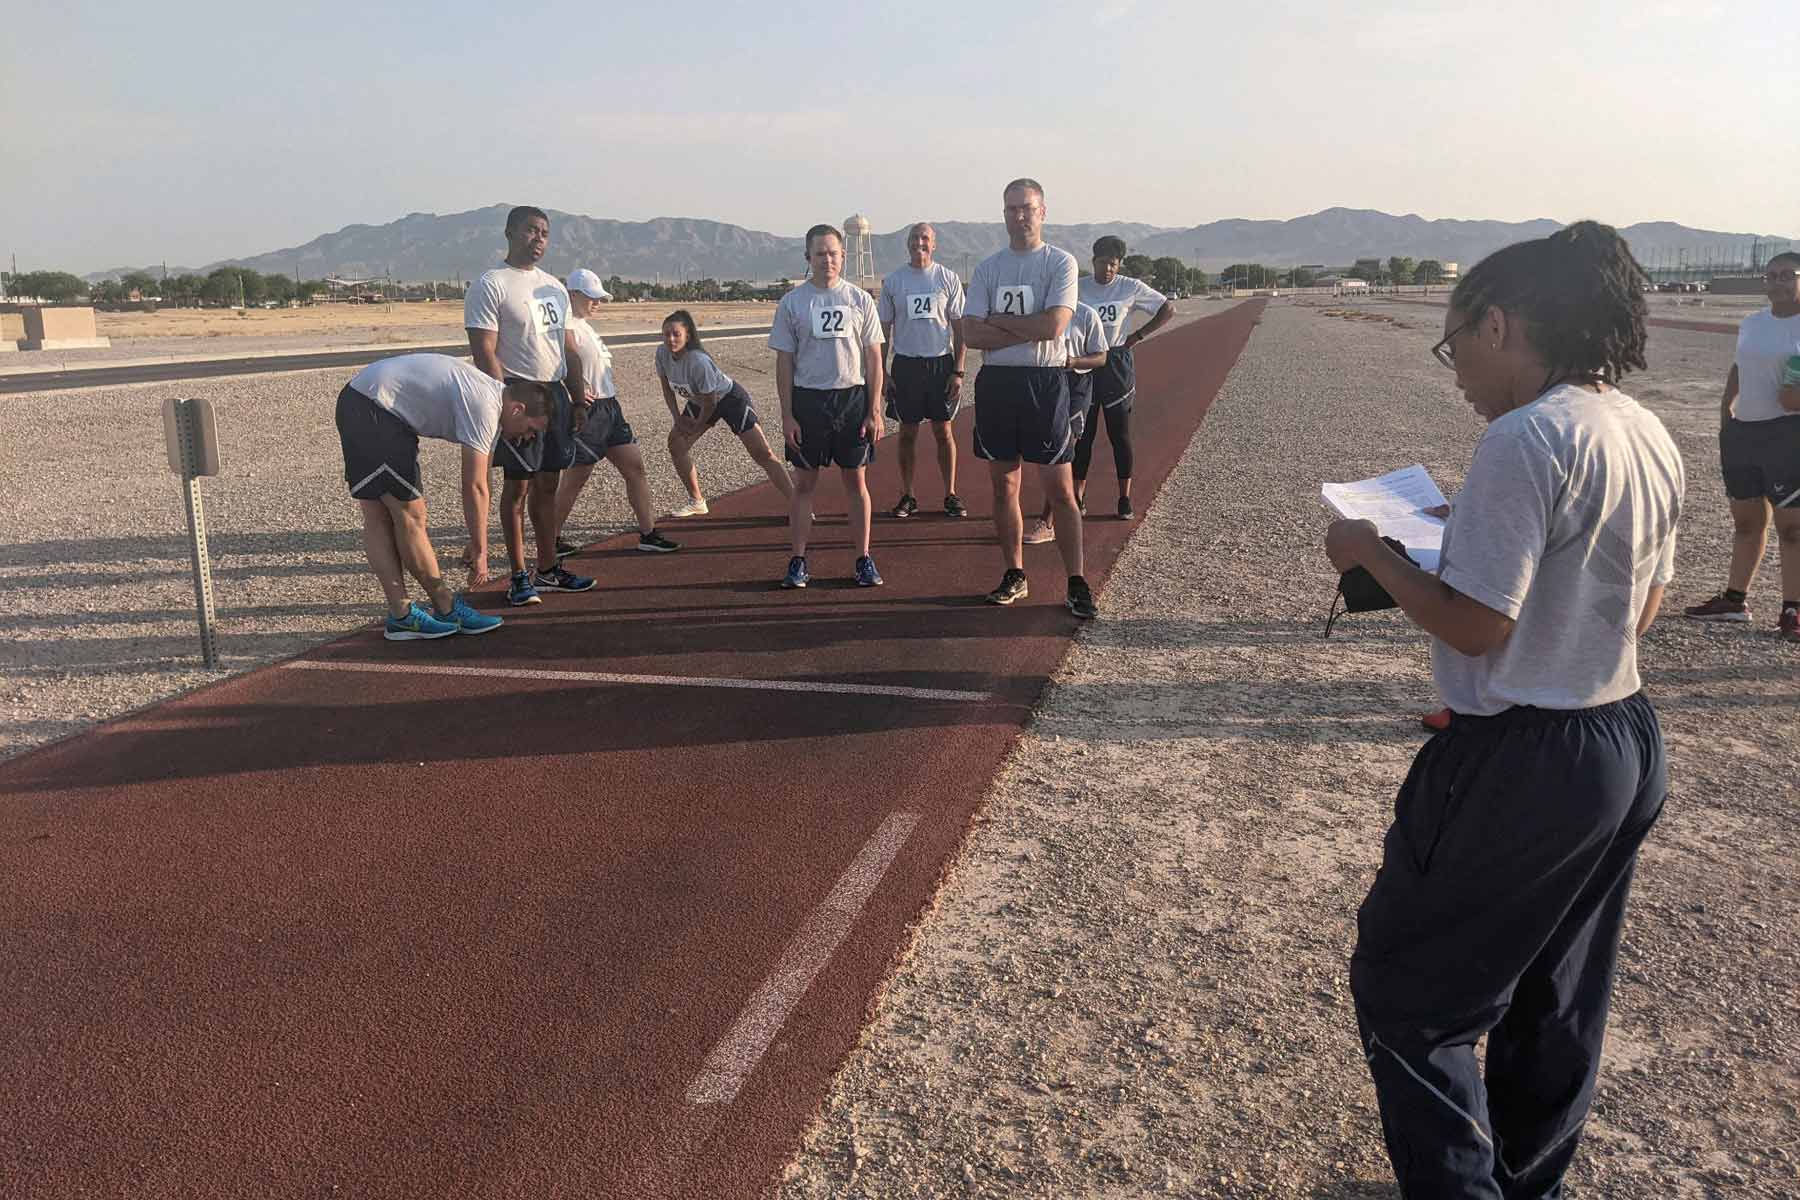 New Air Force PT Test Will Have Walking Option for Some Troops, General